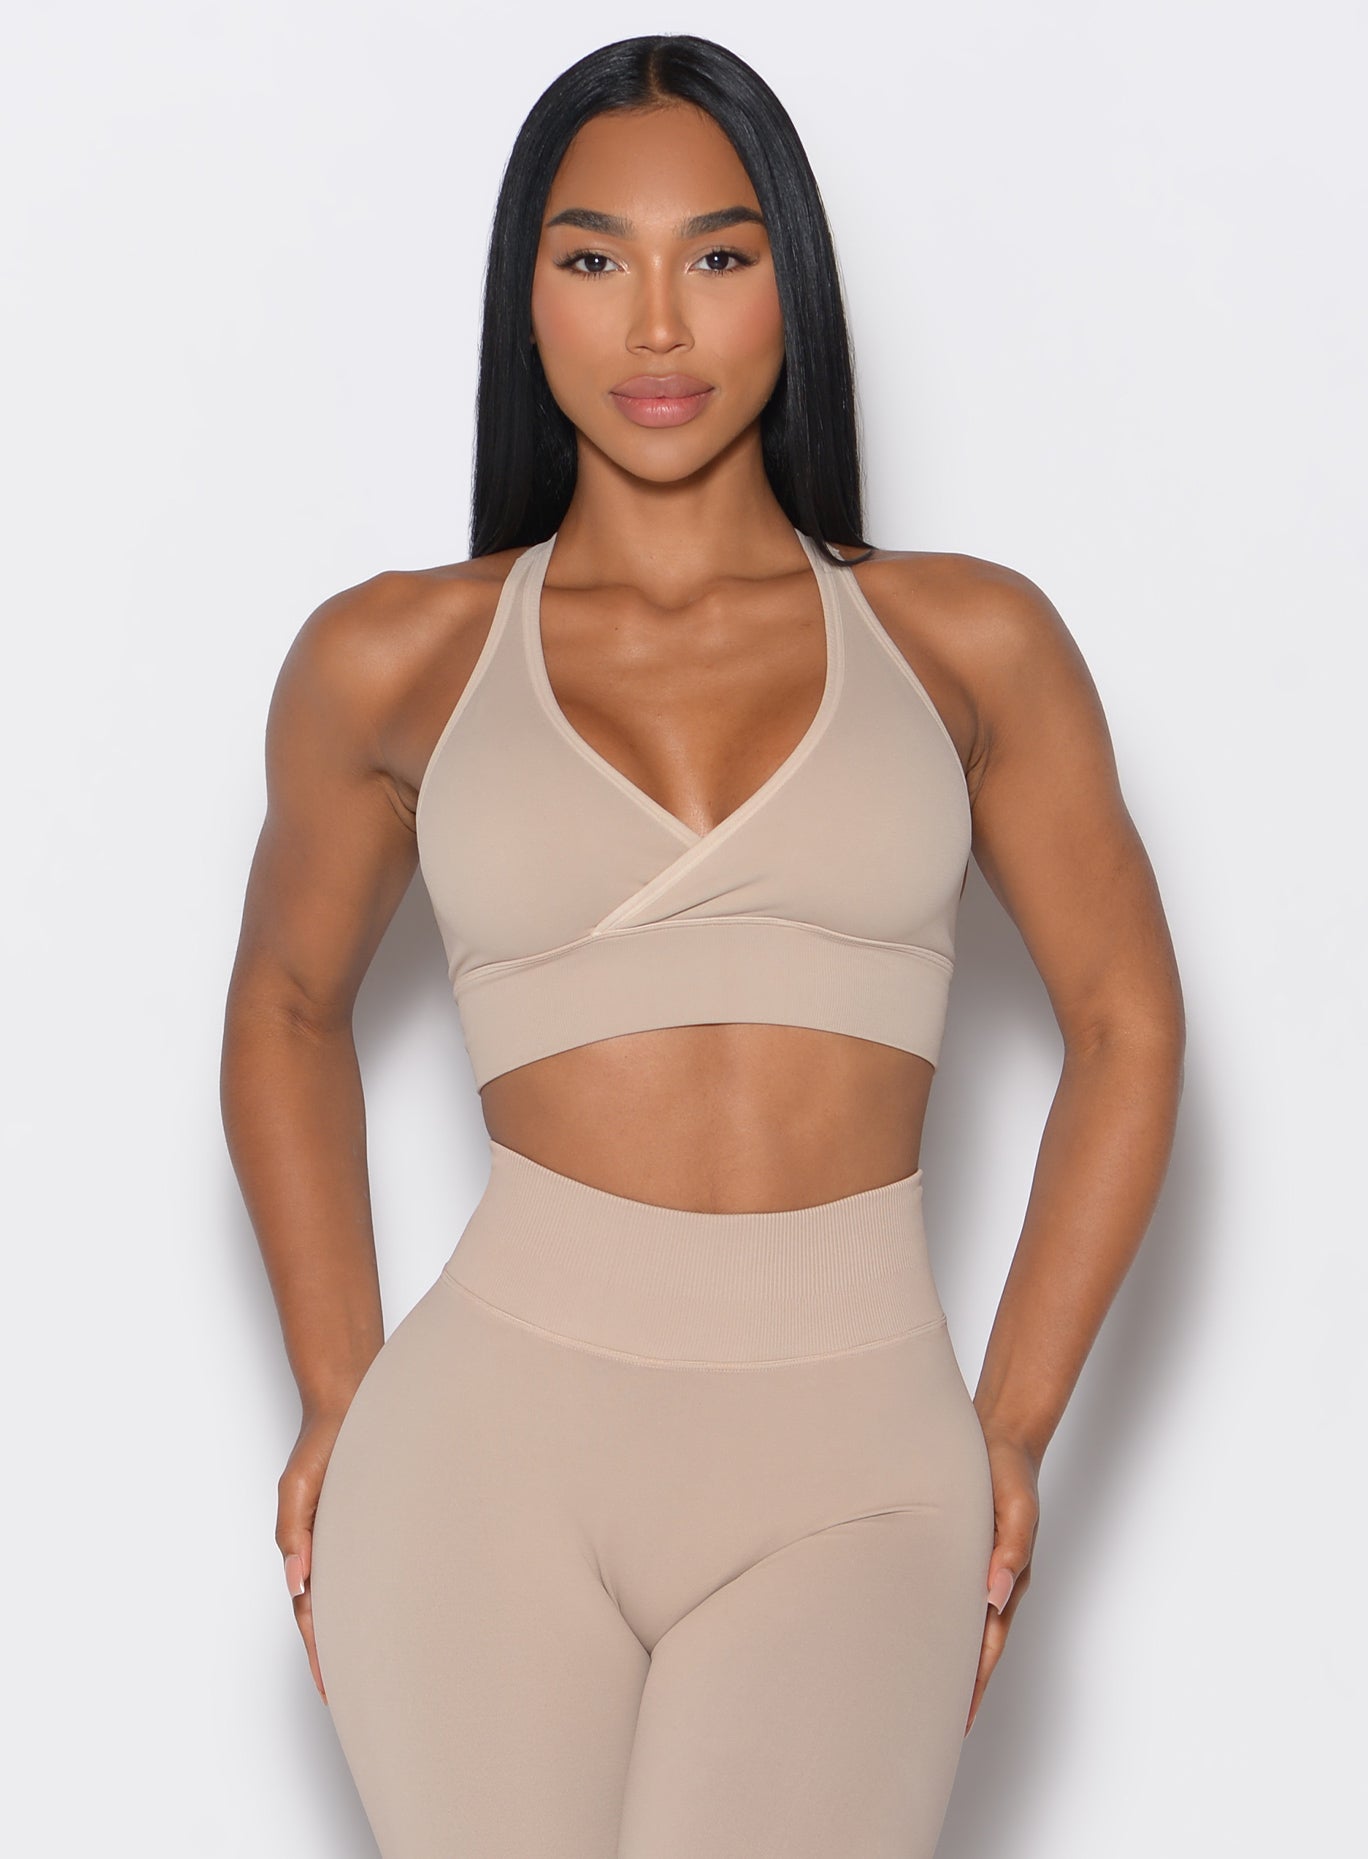 model facing forward wearing our cross over bra in timeless taupe color along with the matching leggings